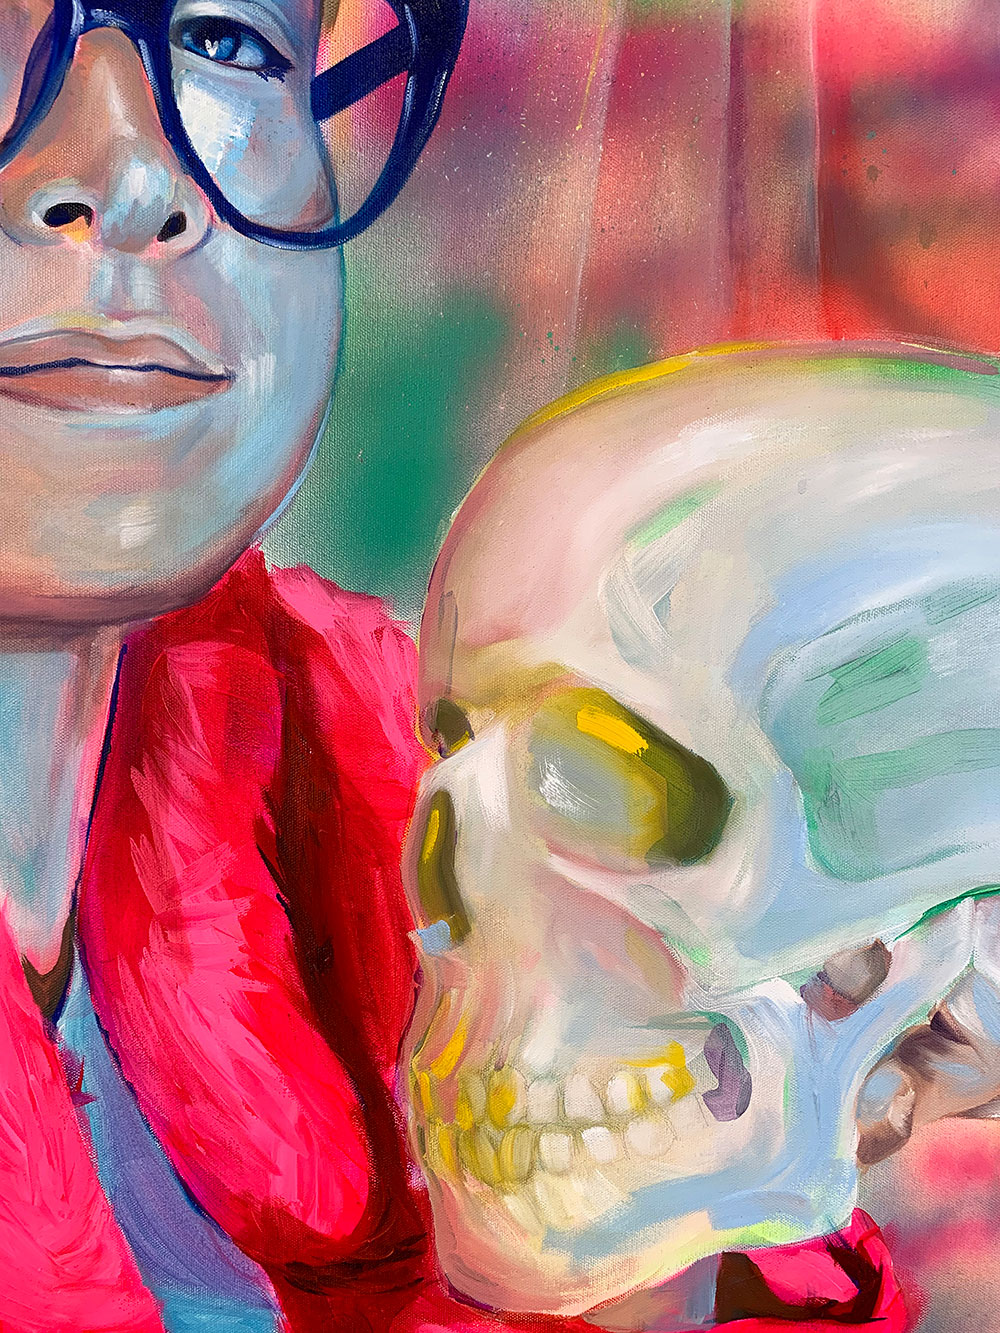 Colorful self portrait figurative painting - girl with white skin, blonde hair, and blue glasses, holding a human skull